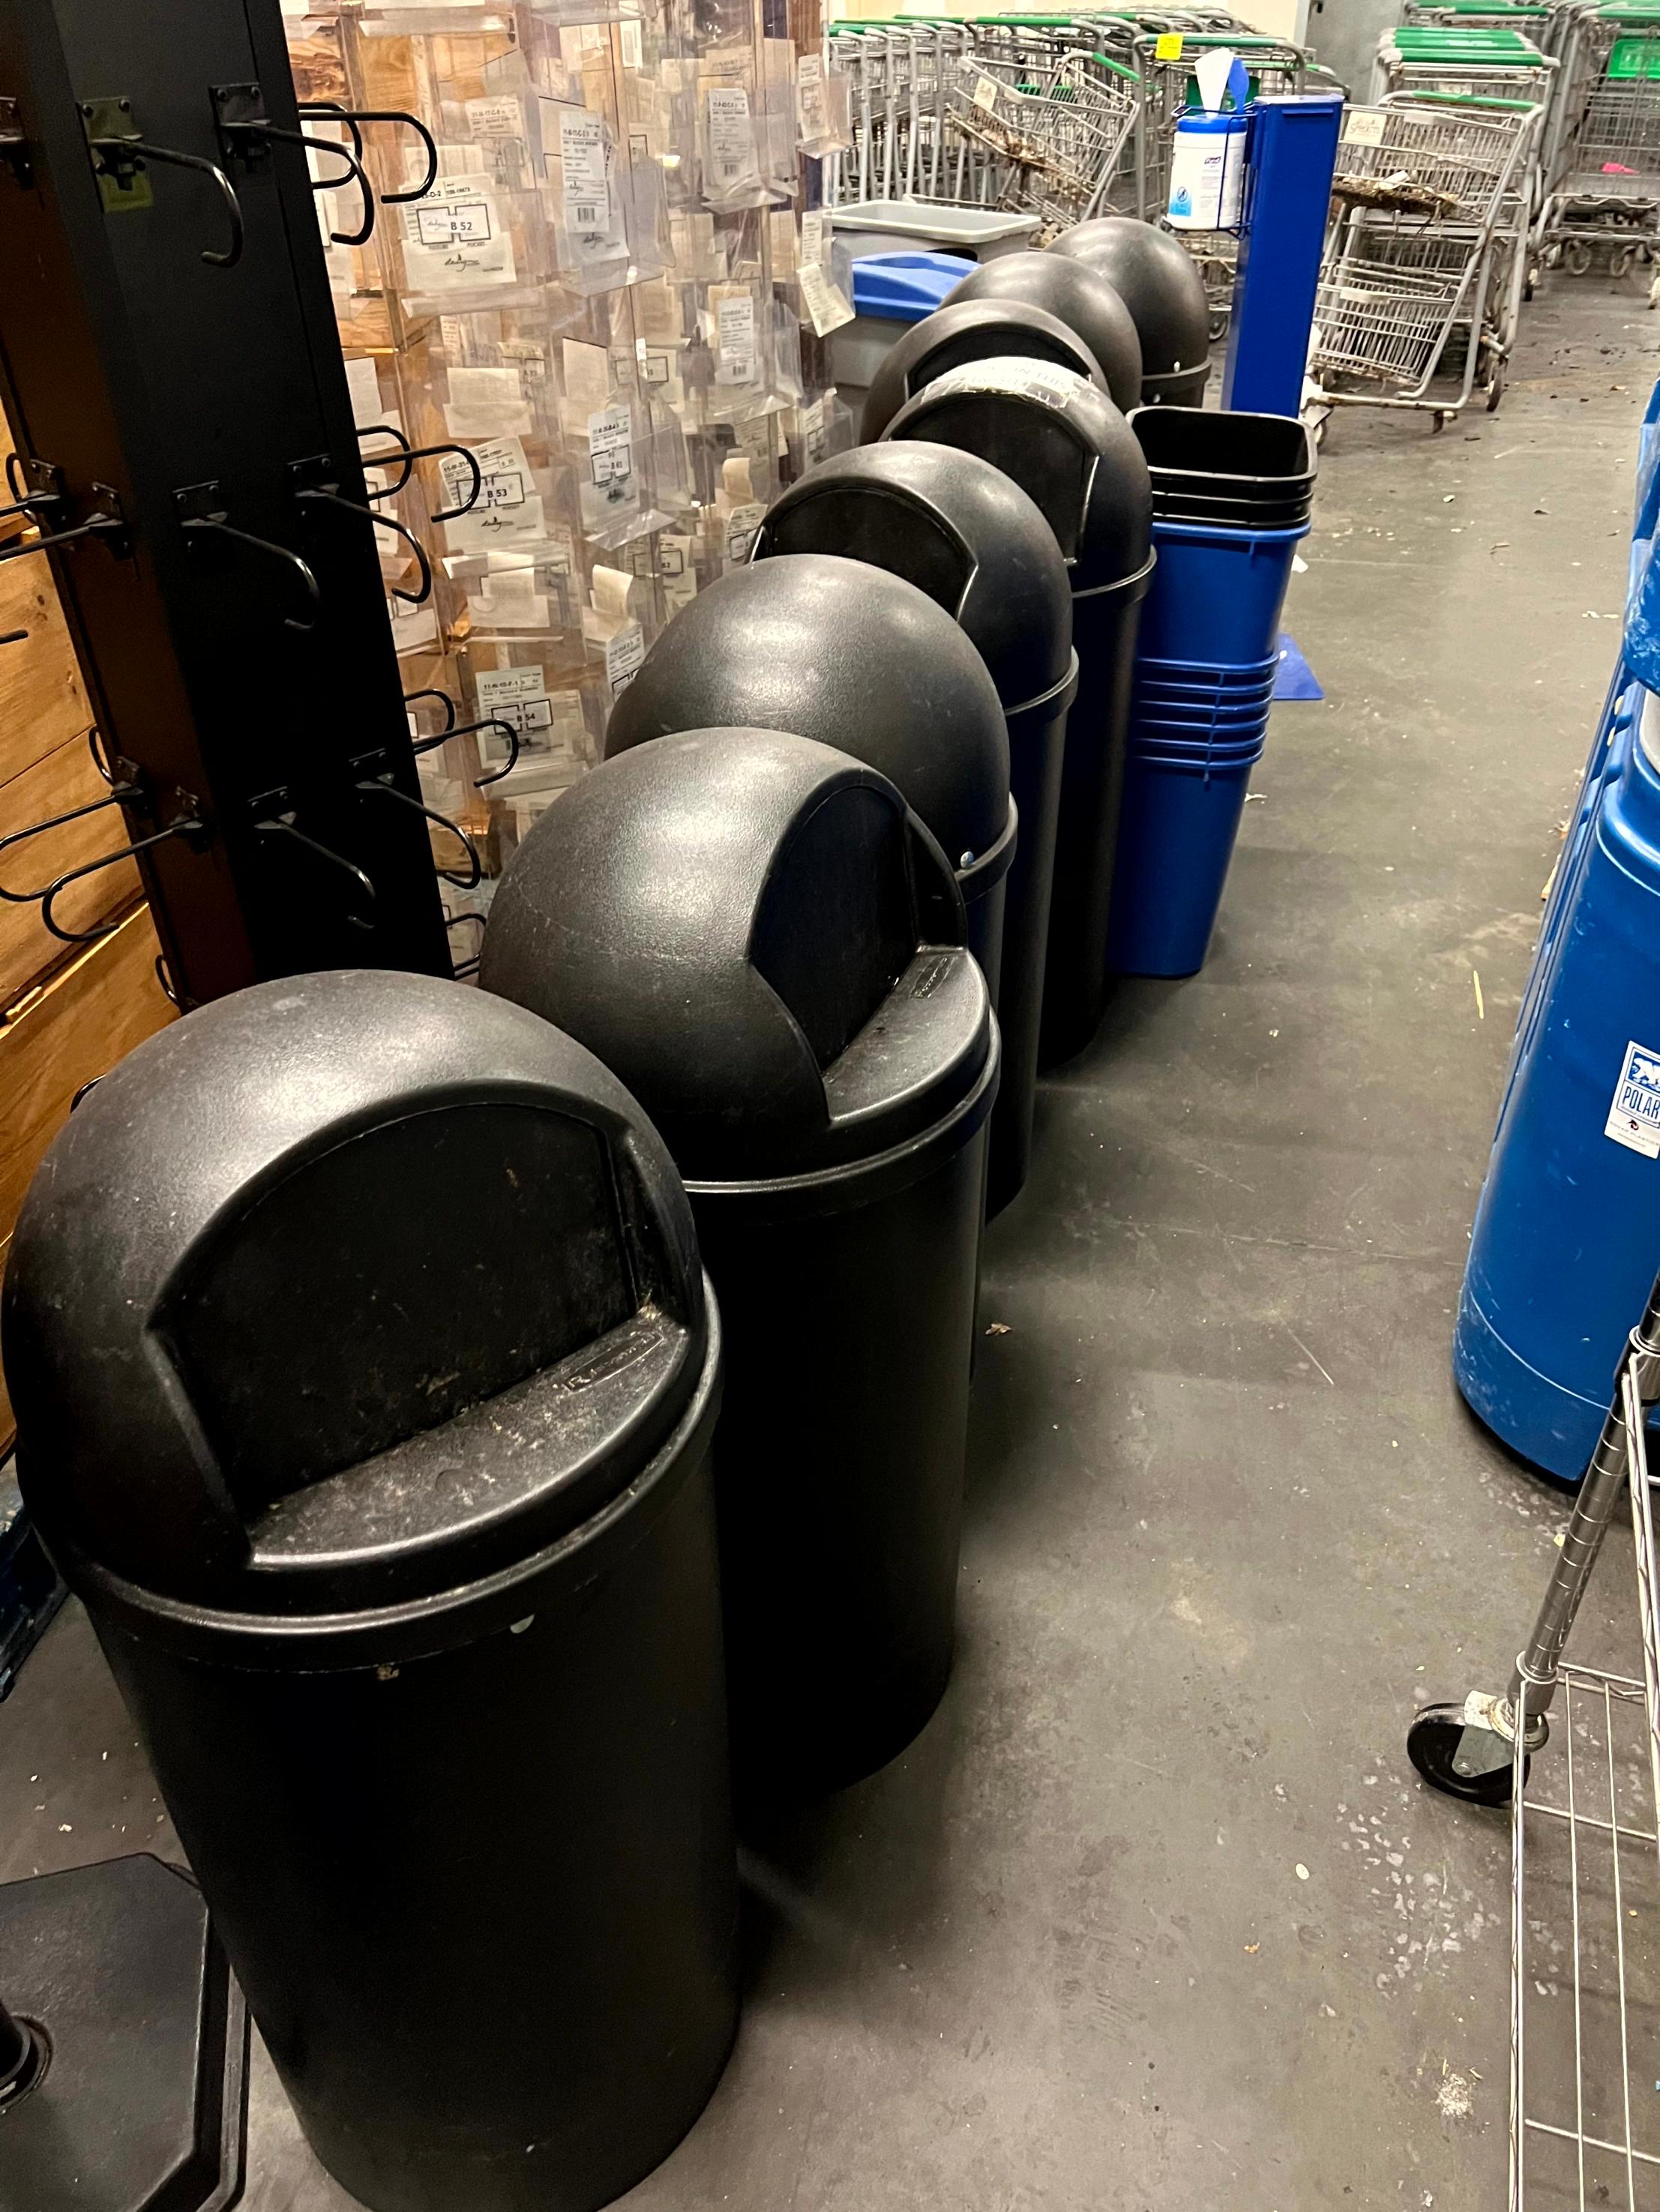 Assorted Trash Cans and Receptacles